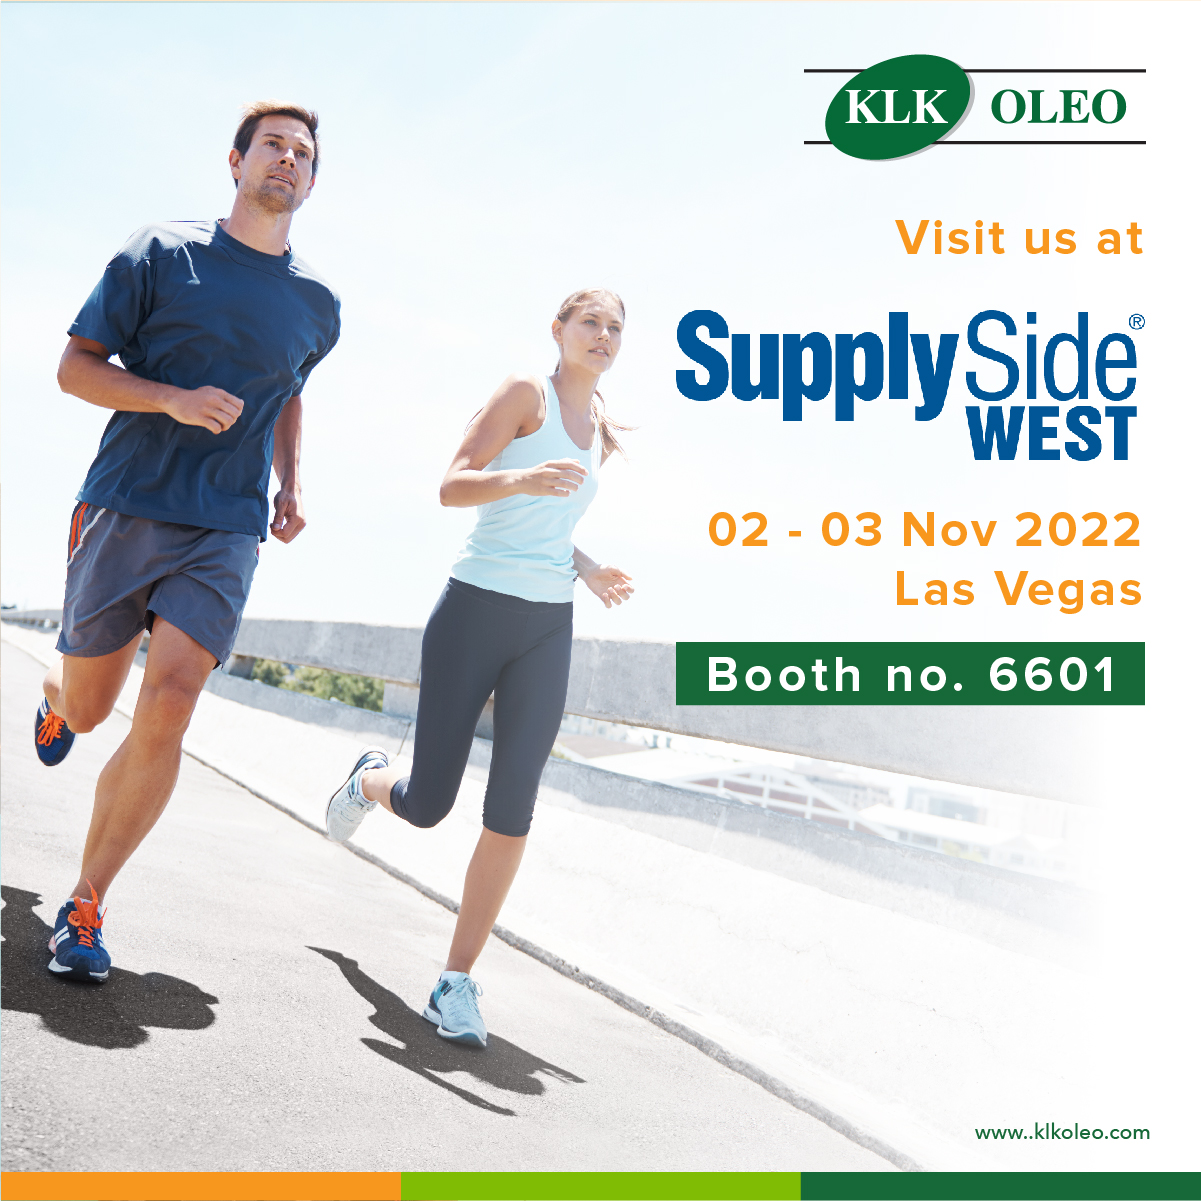 Elevate your products with KLK OLEO at the upcoming SupplySide West